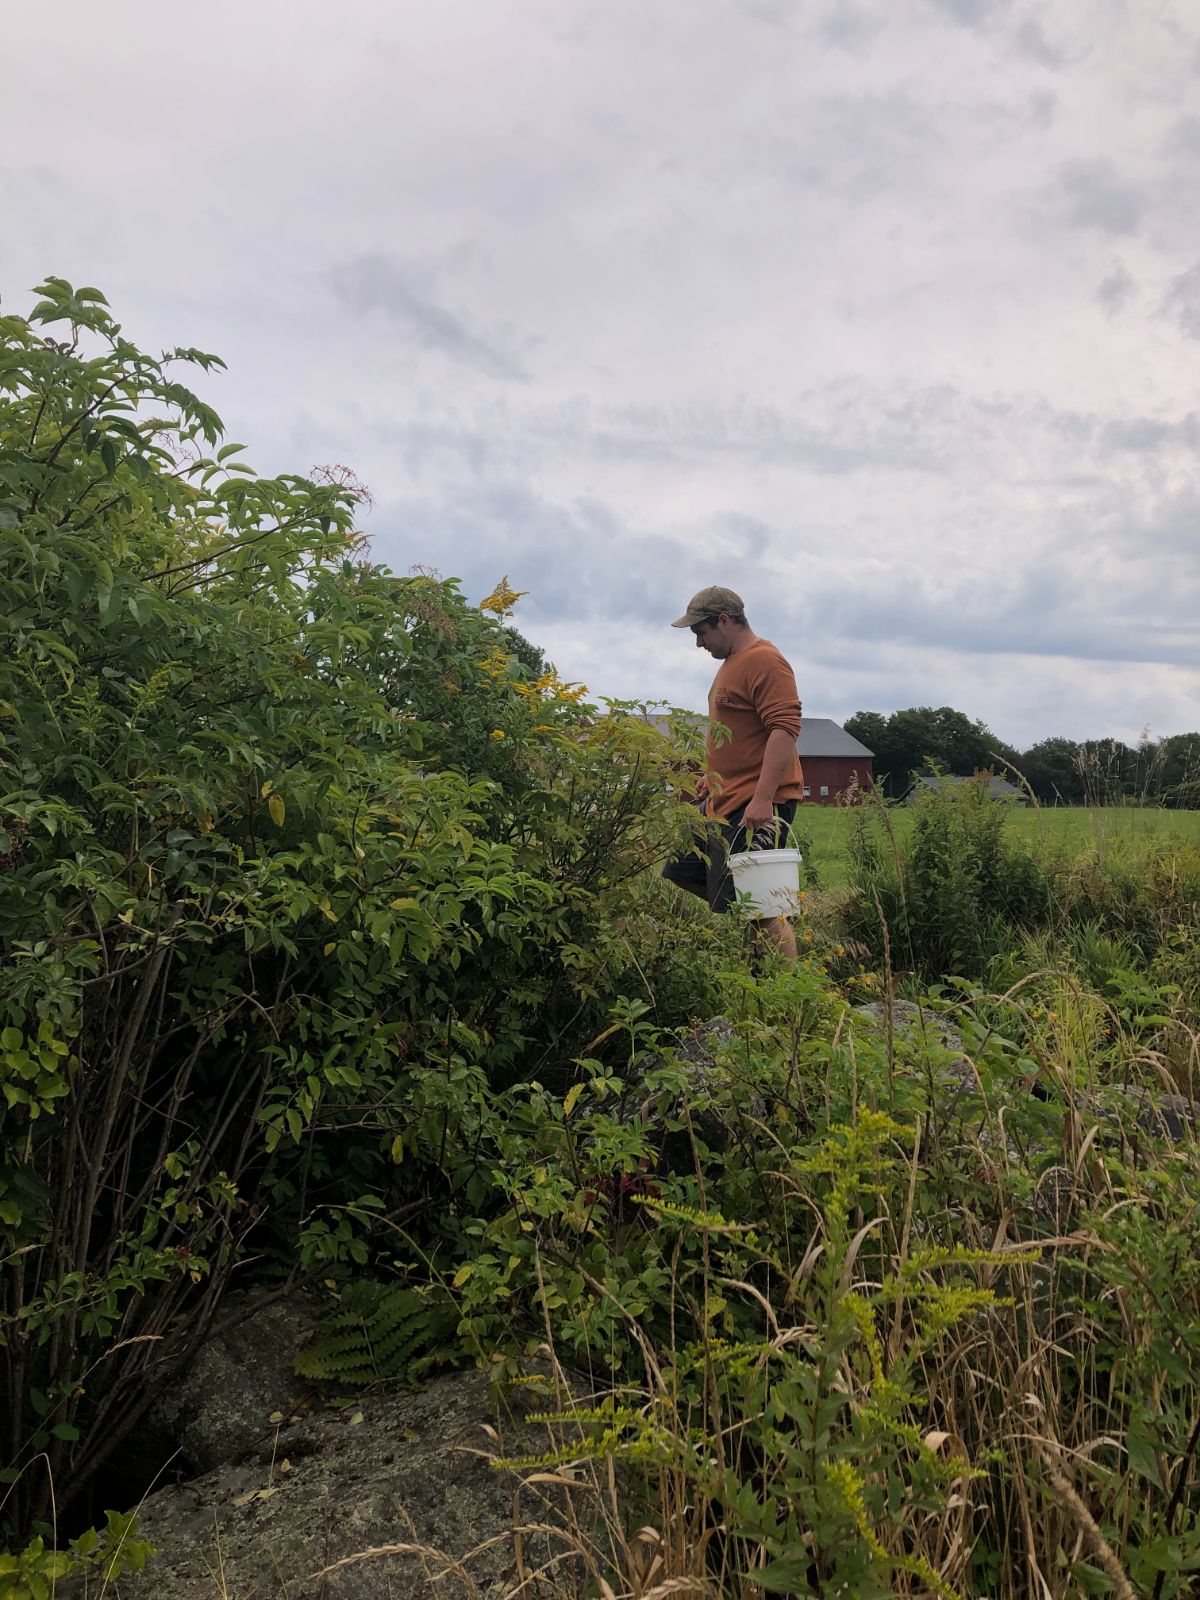 A man forages for wild elderberries in a field